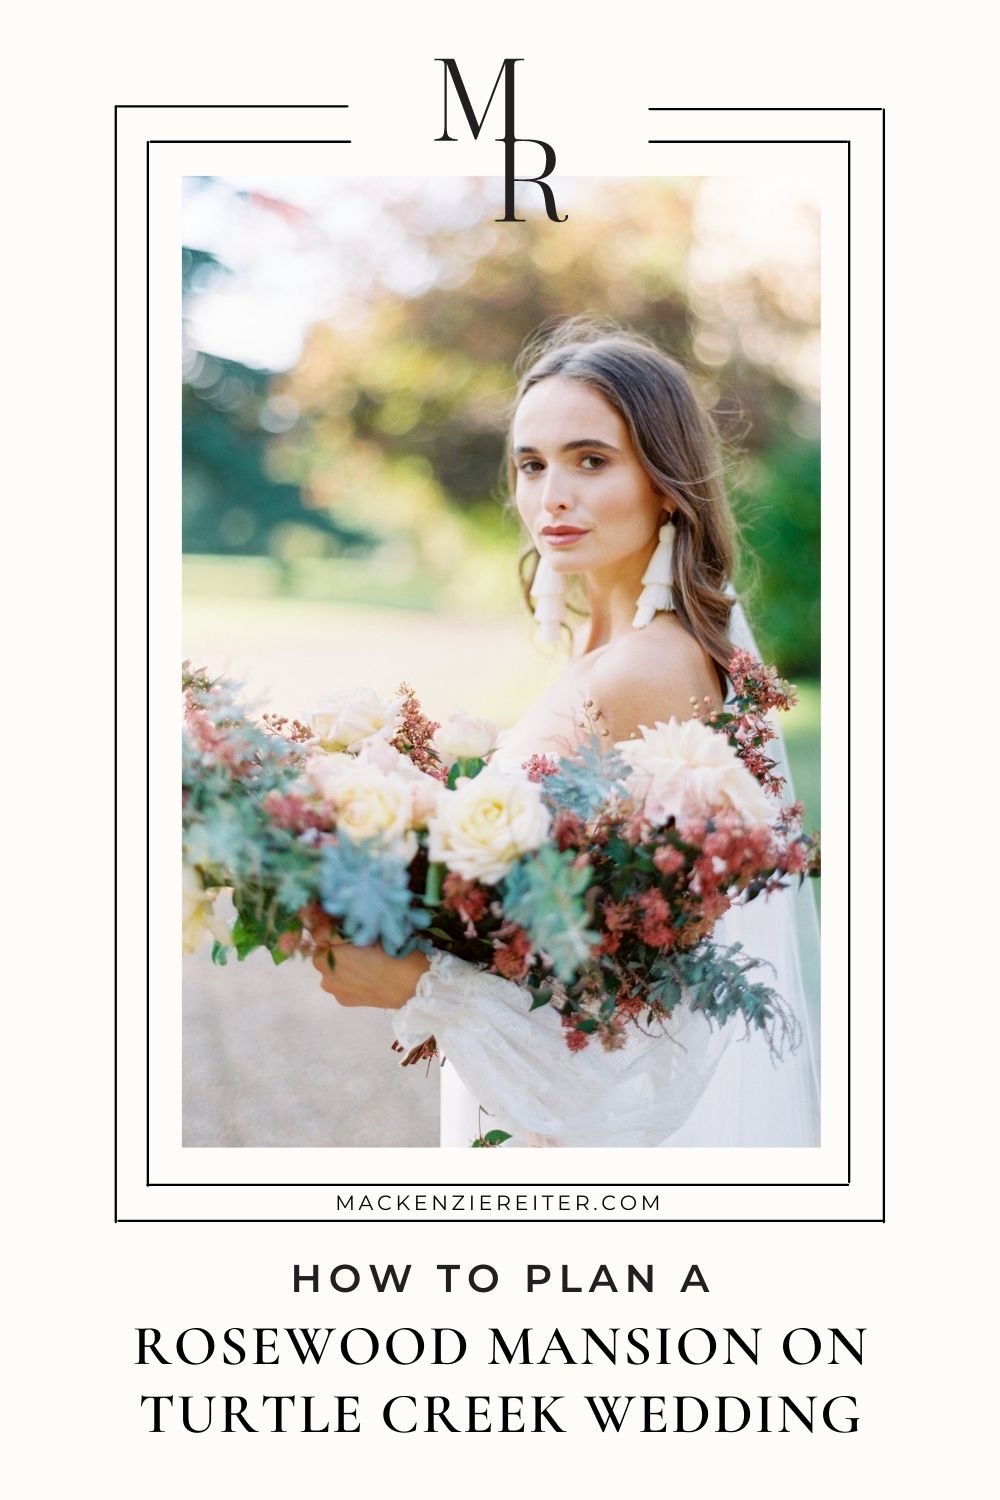 Bride looking enchantingly at the camera while holding her stunning bouquet; image overlaid with text that reads How to Plan a Rosewood Mansion on Turtle Creek Wedding